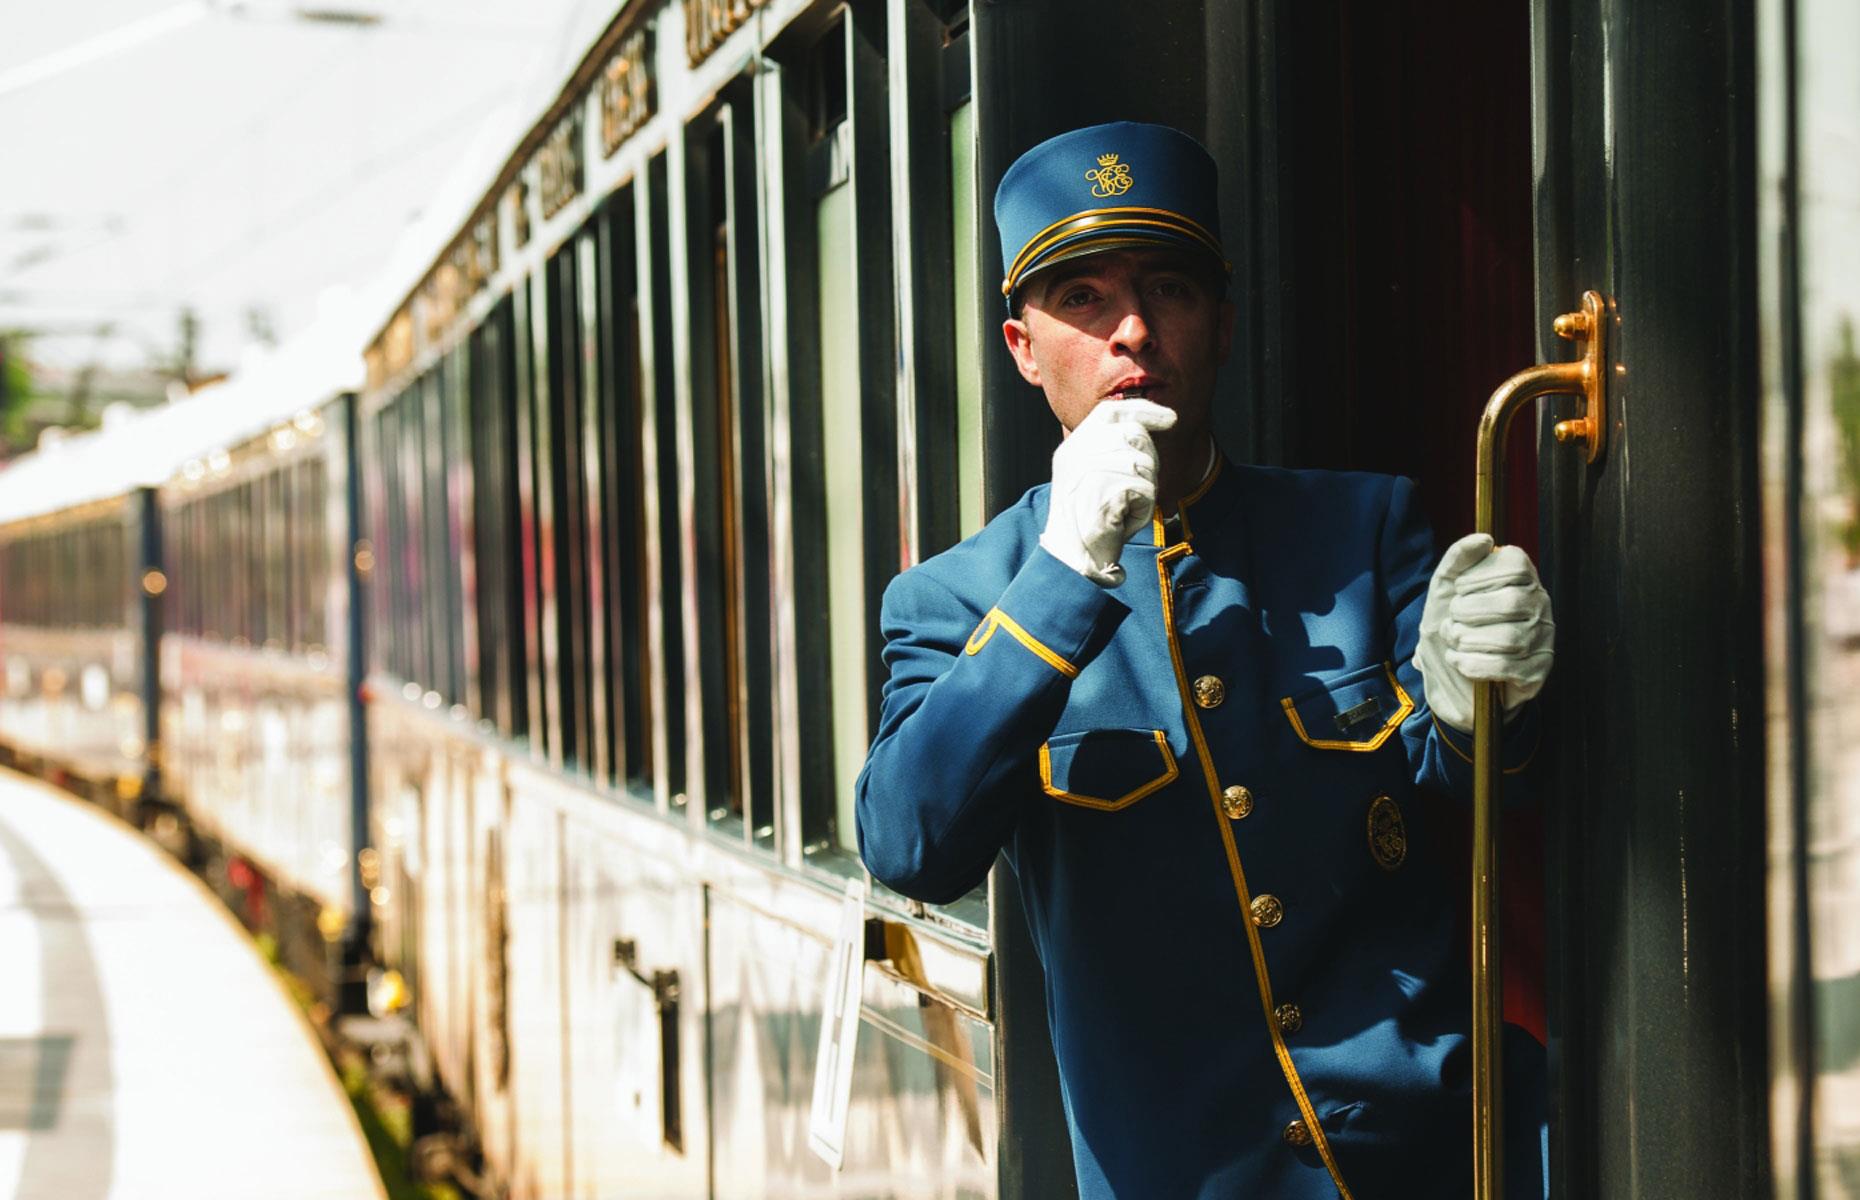 <p>A once-in-a-lifetime adventure for the mega-wealthy rail enthusiast with time to spare, the Around the World by Luxury Train package from US travel operator Railbookers is an 80-day extravaganza.</p>  <p>It includes journeys on seven of the world's most splendid trains: Canada's <em>Rocky Mountaineer</em>, <em>Rovos Rail</em>, <em>Danube Express</em>, <em>Eastern & Orient Express</em>, <em>Royal Scotsman</em>, <em>Maharajahs' Express</em>, and <em>Venice Simplon-Orient-Express</em>.</p>  <p>Needless to say, the mind-blowing package, which covers 13 countries, is mind-blowingly expensive. Tickets start from $113,559 (£89,462) per person, based on two sharing.</p>